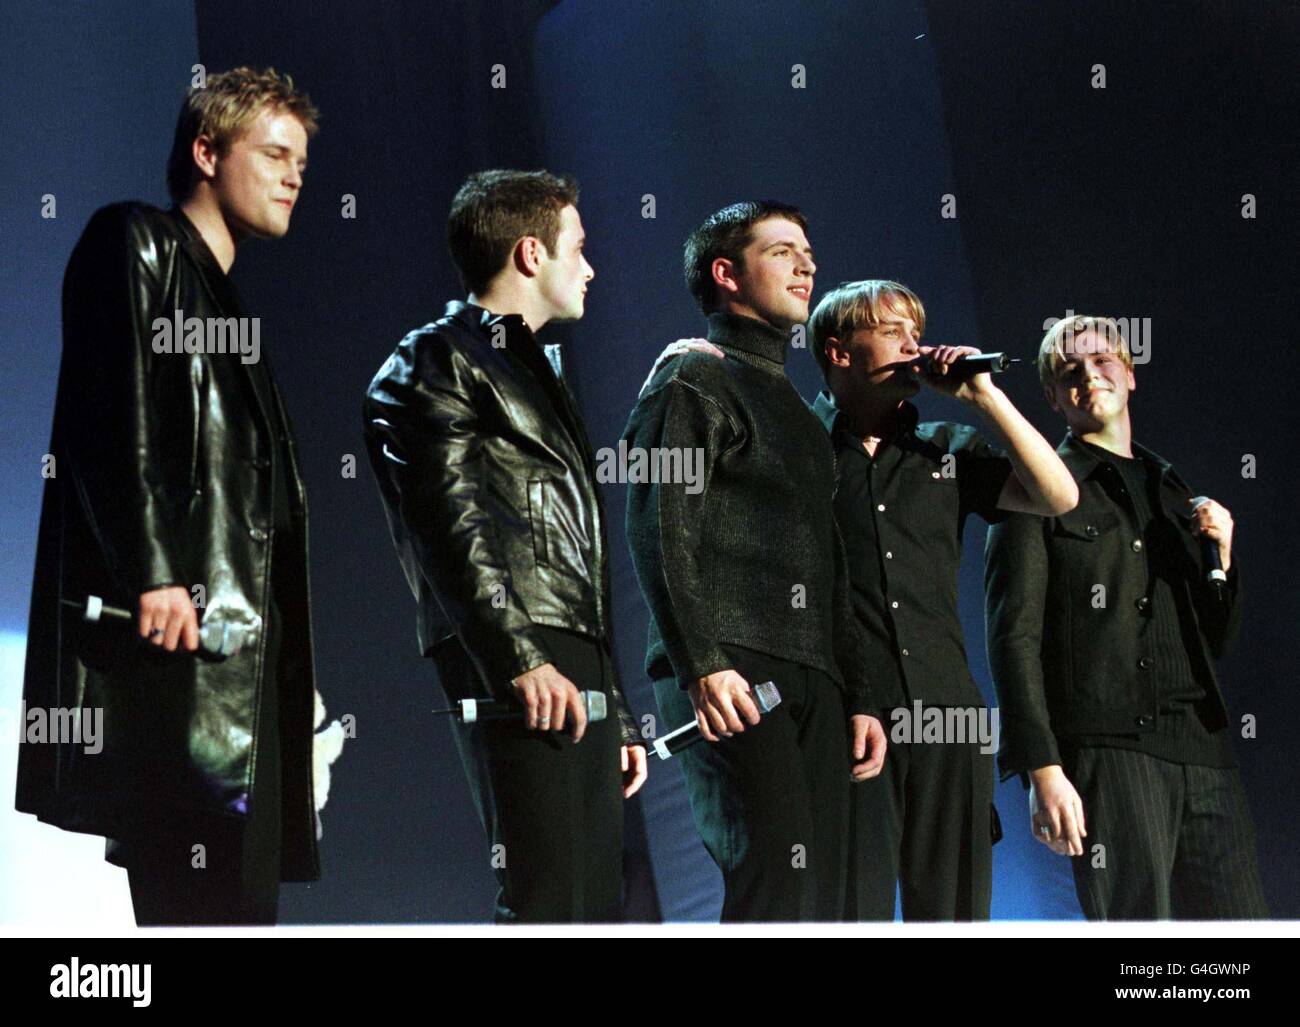 Singing group WestSide, who are managed by Boyzone's Ronan Keating, at the Childline Concert in the Point Theatre Dublin. The group have re-named themselves Westlife after finding another group called Westside. L-R: Nicky Byrne, Shane Filan, Mark Feehily, Kian Egan and Bryan McFadden. Stock Photo